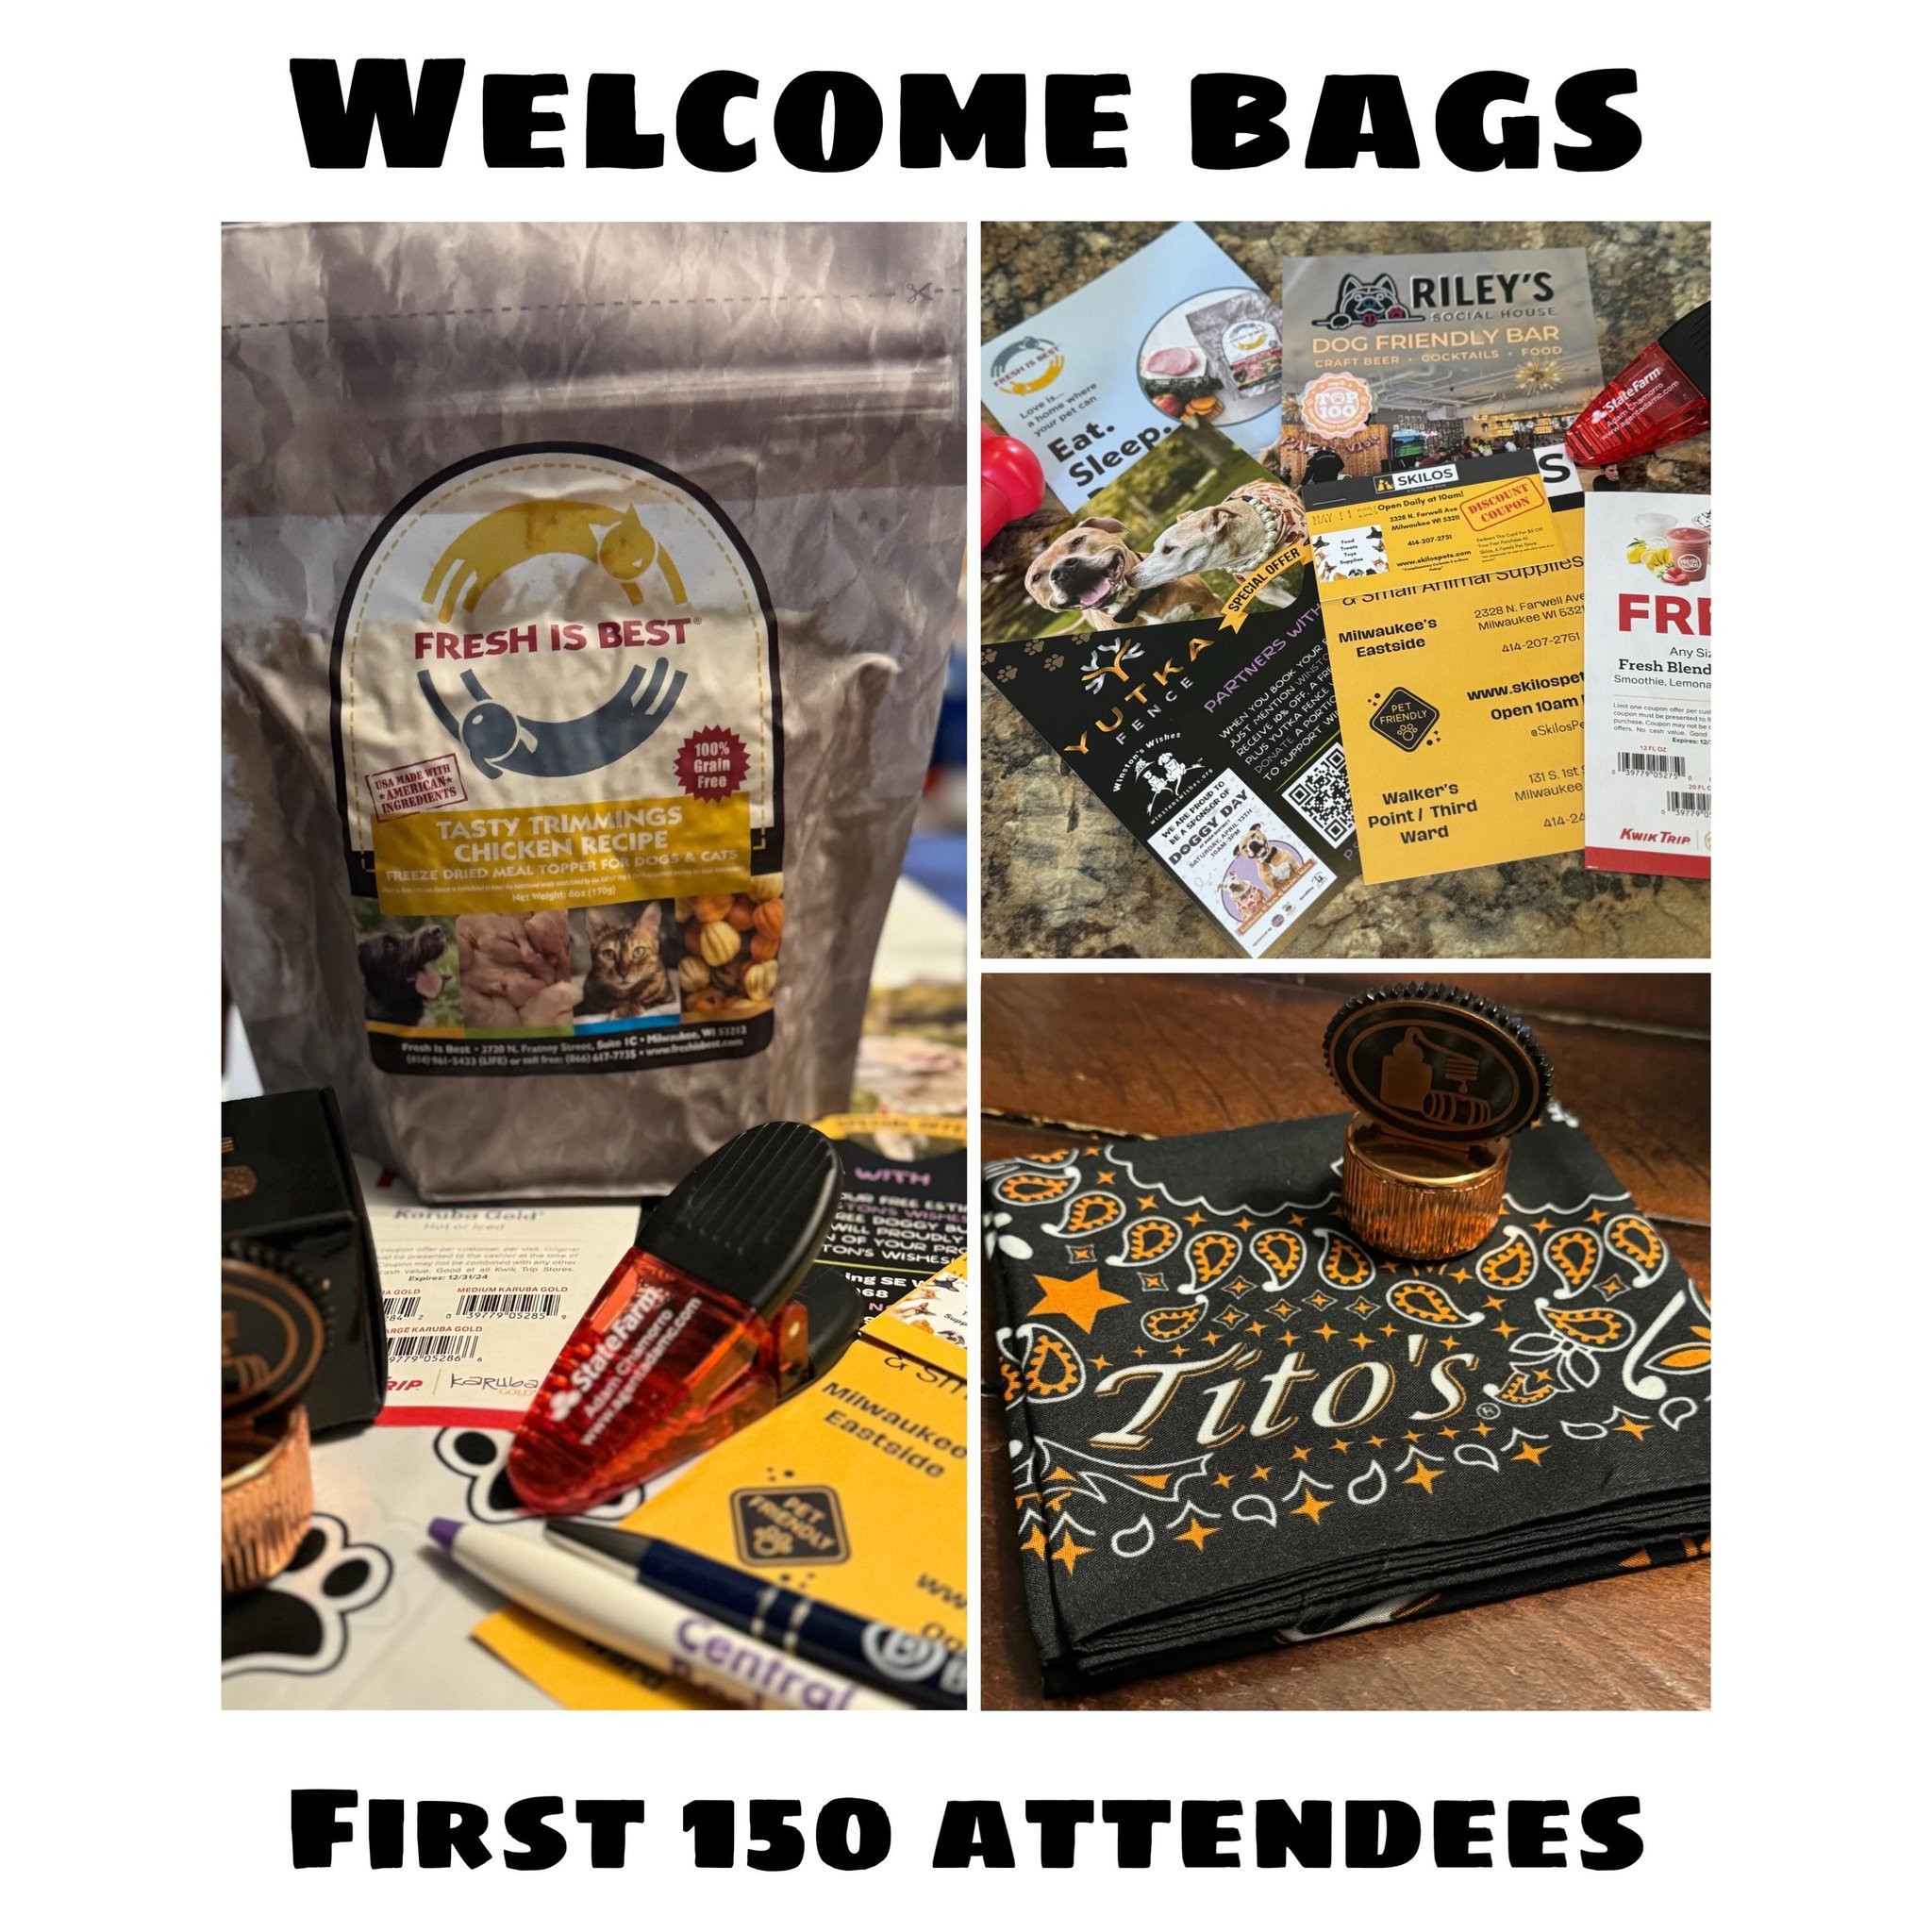 We are so excited for this year&rsquo;s Doggy Day at Deer District welcome bags!🤩 The first 150 attendees will receive a bag filled with swag from our event and GOLD PAW Sponsors! Stop by the @winstonswishes Welcome Booth to snag one for yourself! ✨